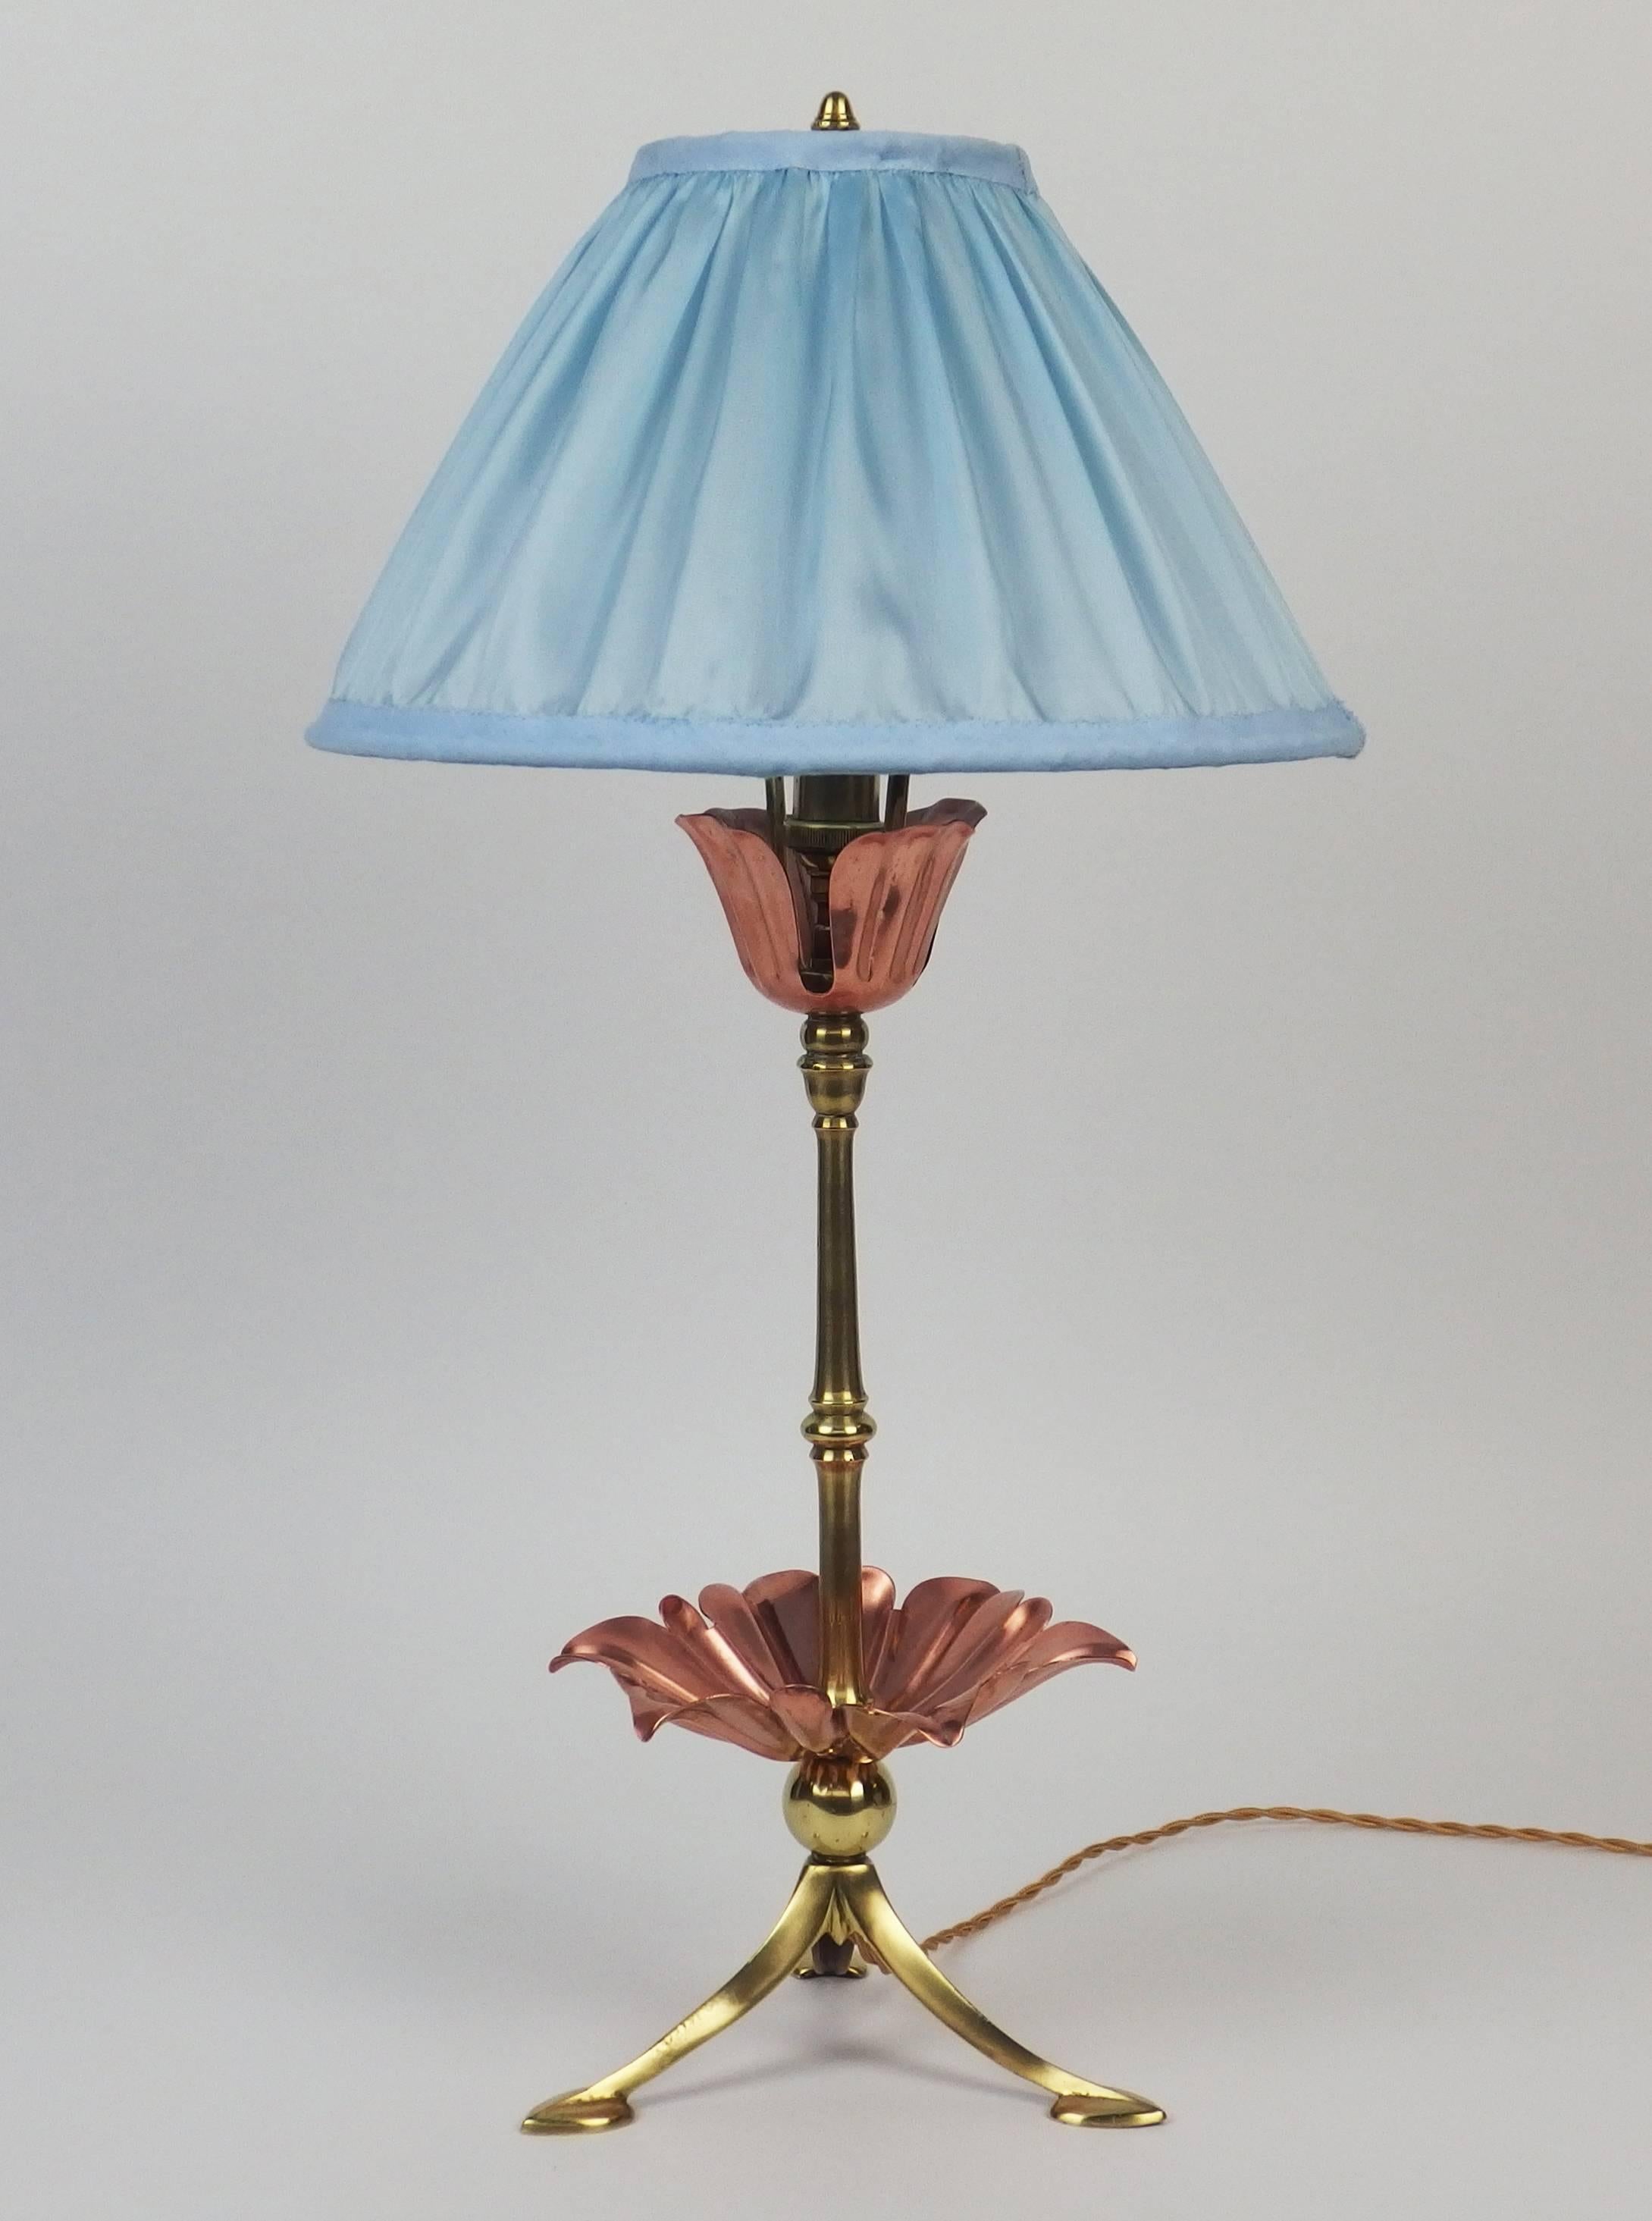 A brass table lamp with copper flowers decorations. New silk shade.
Unsigned.